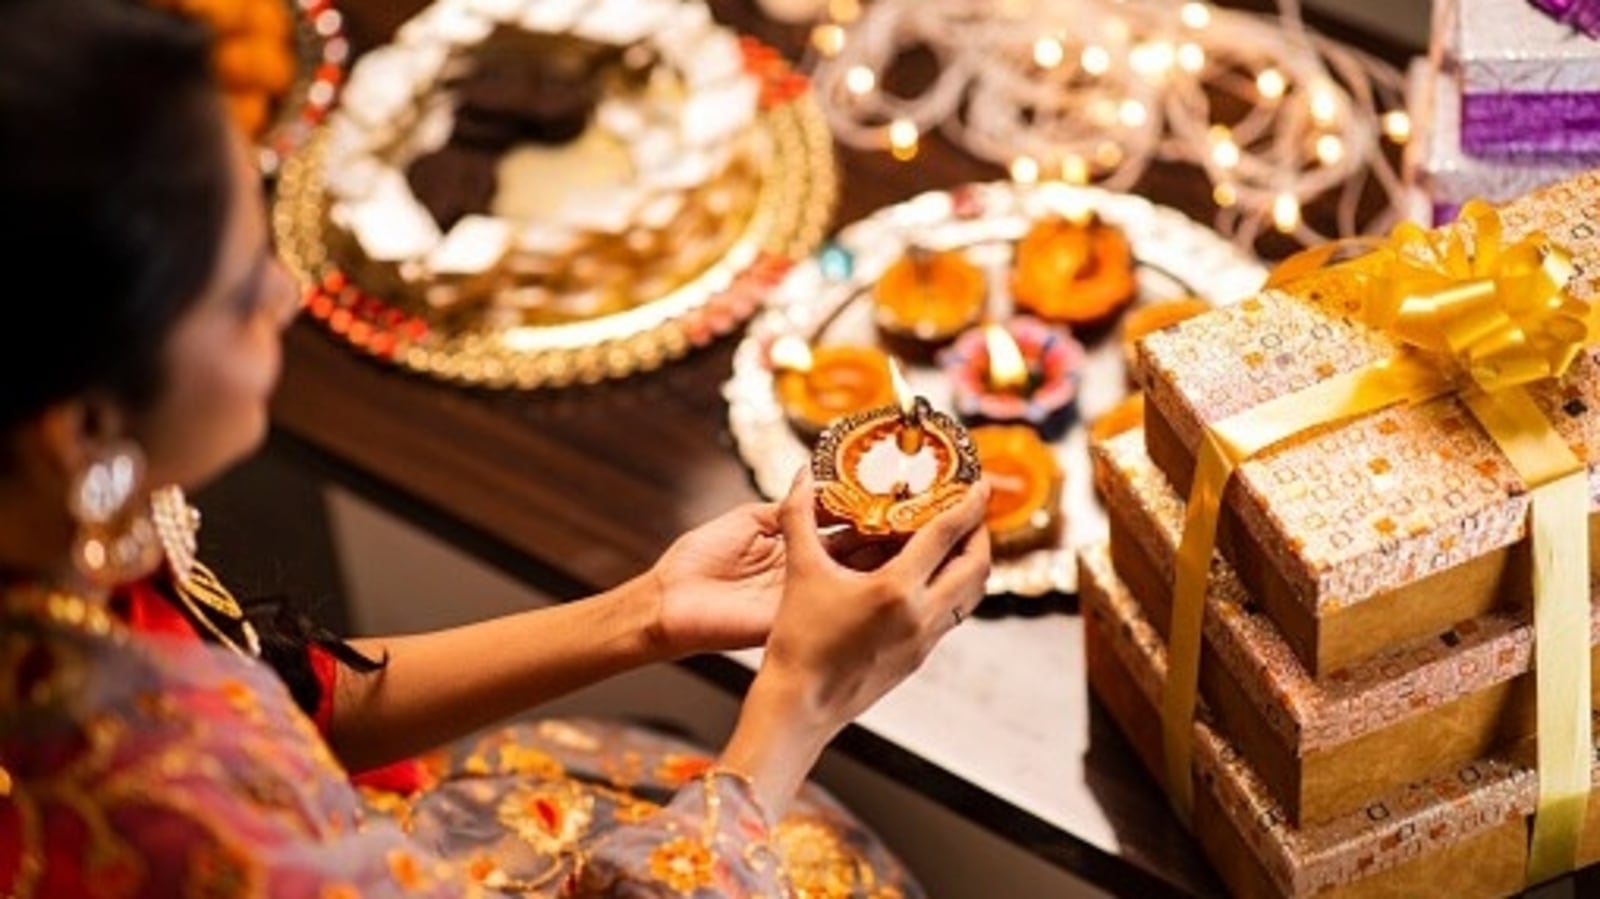 Diwali 2022 decoration ideas: Top tips to make your home festive ready